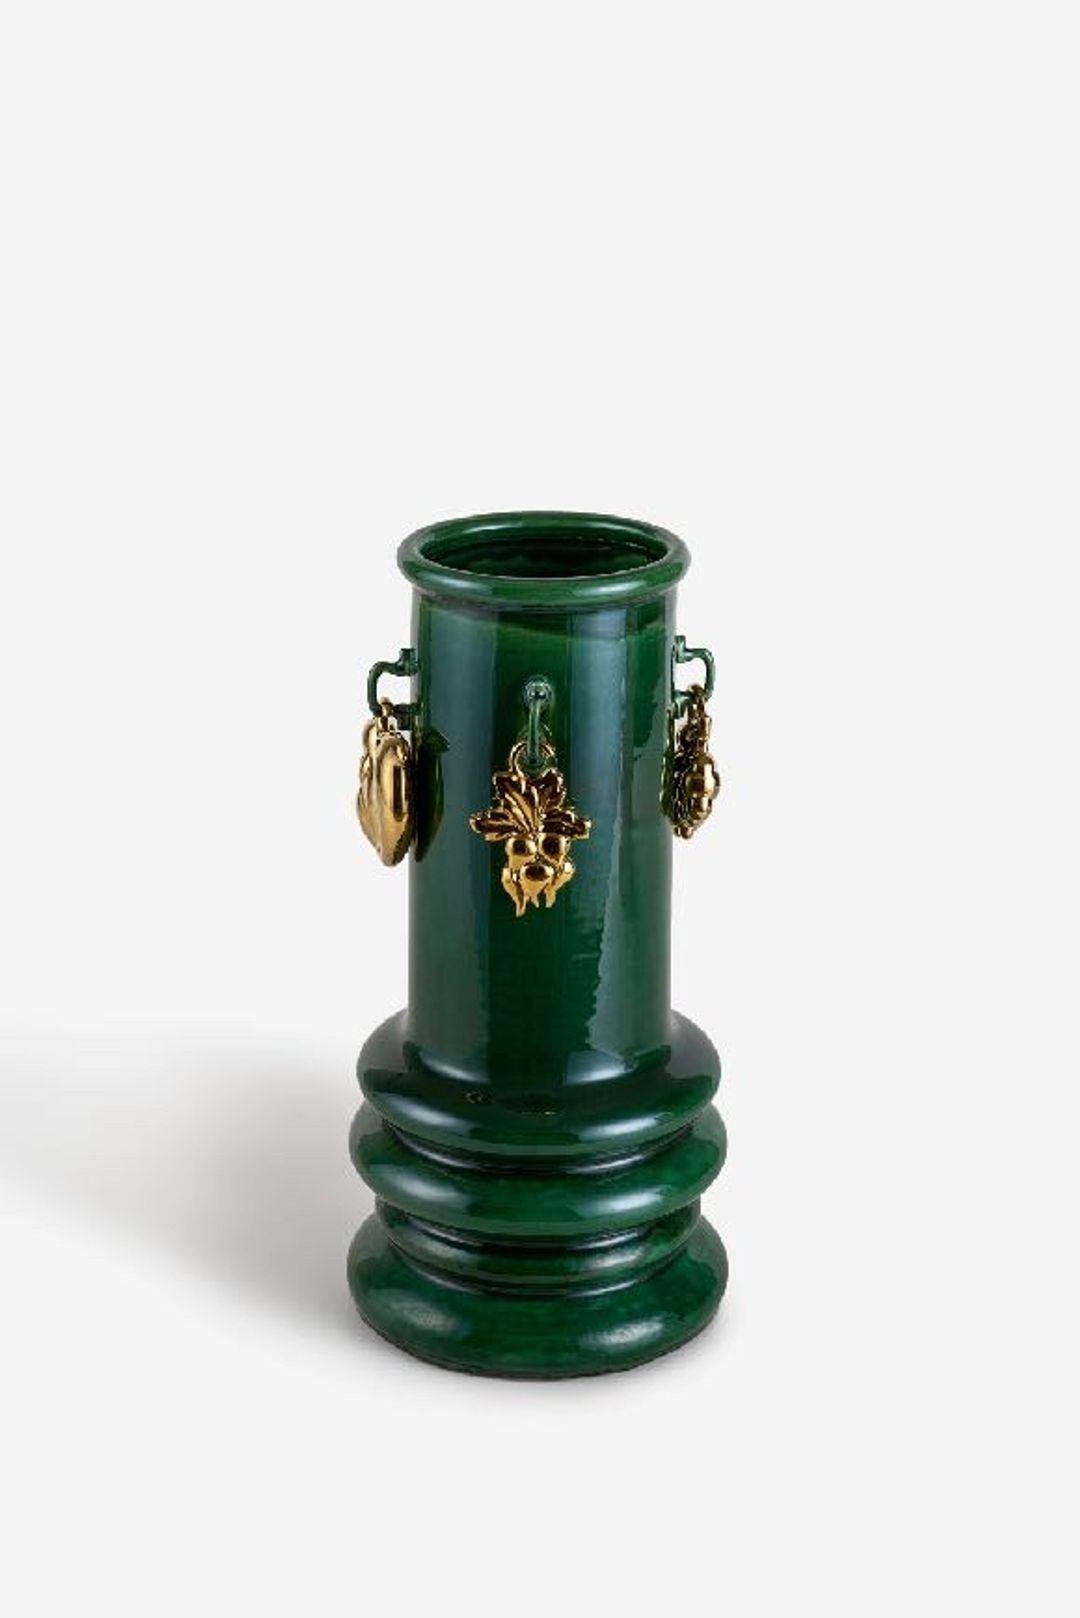 Chinese The Unspoken Green Ceramic Vase by Hua Wang For Sale